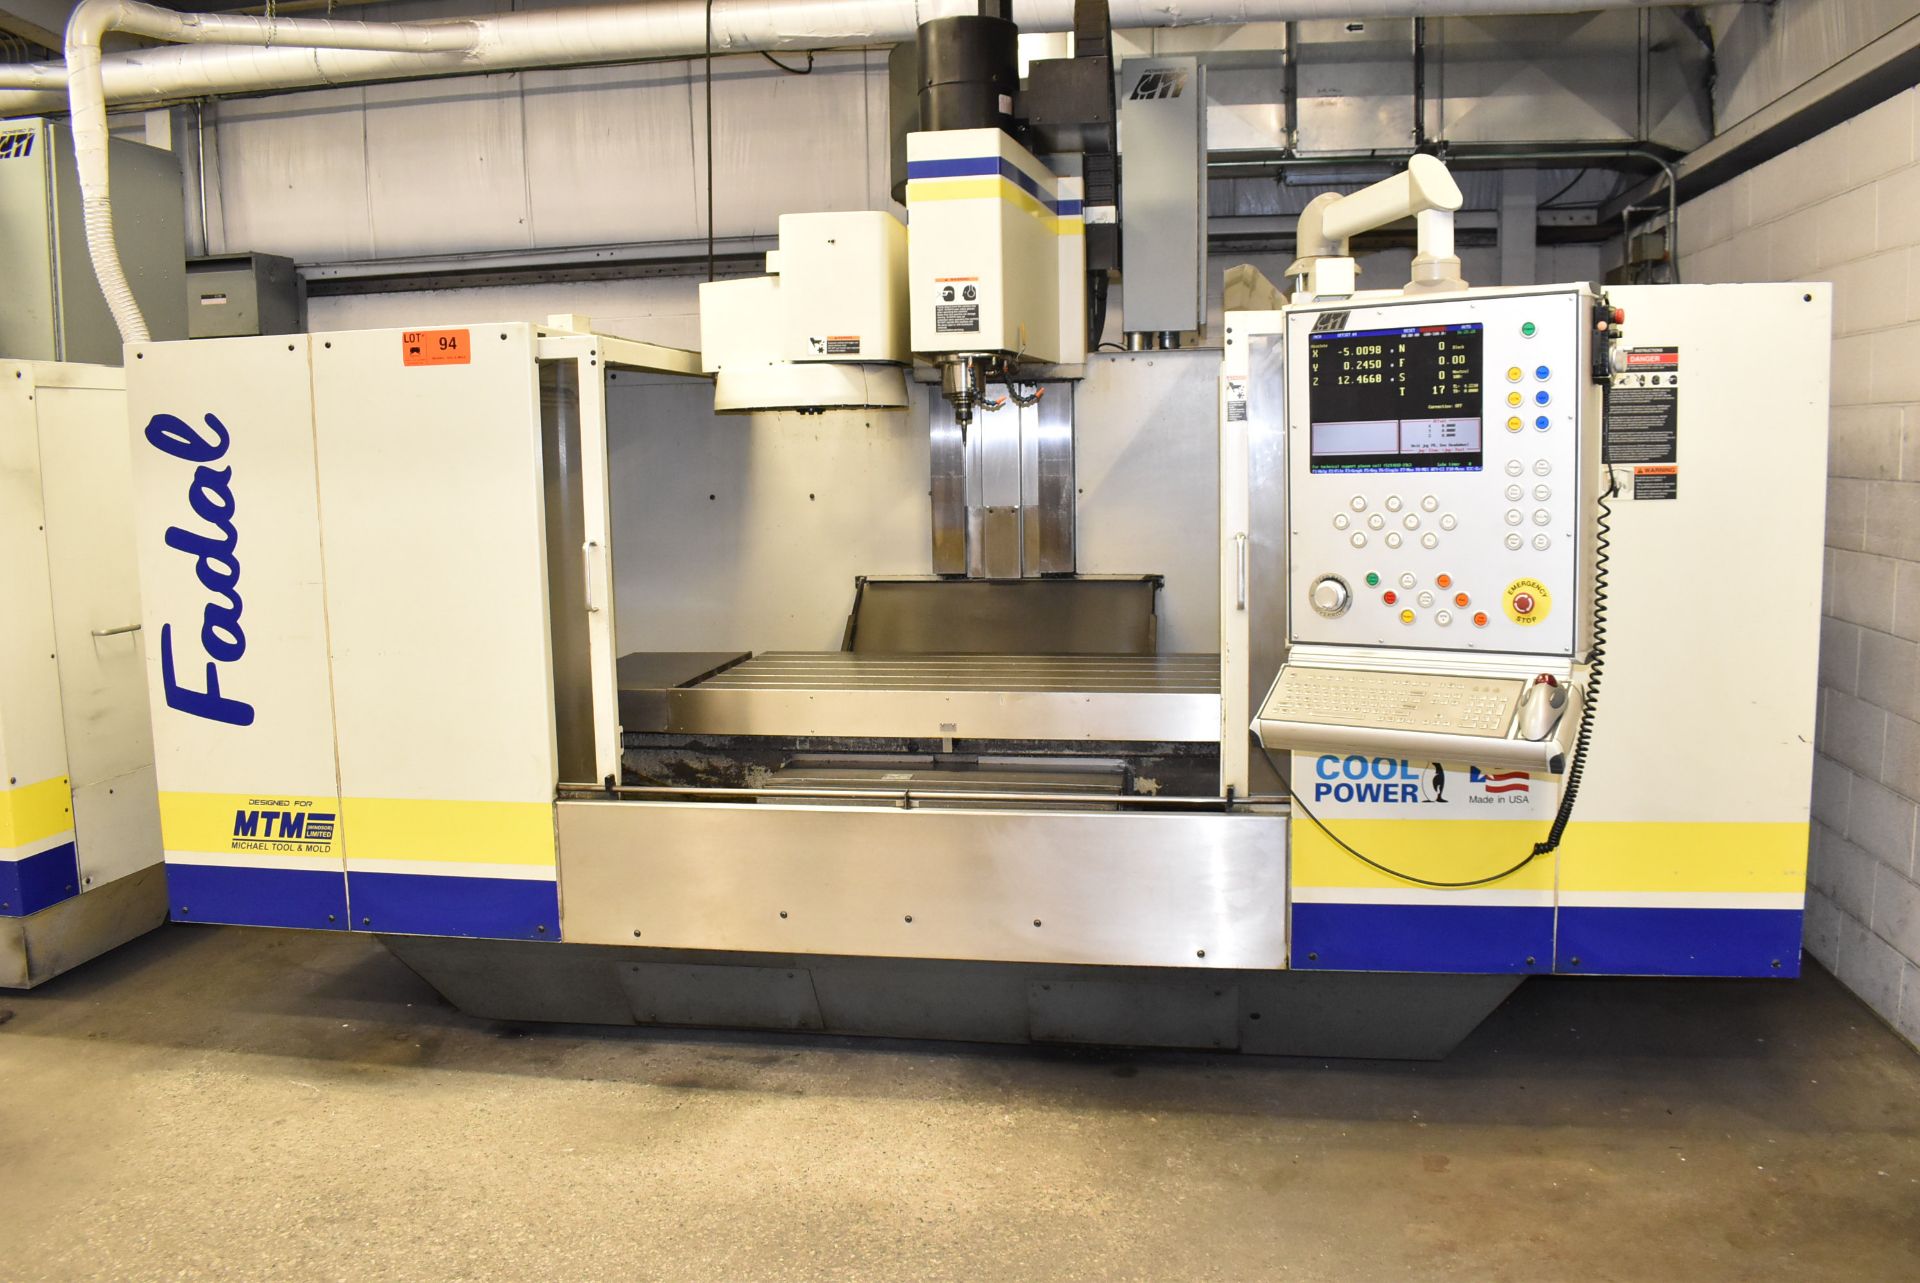 FADAL (R&R 2001) VMC-6030 CNC VERTICAL MACHINING CENTER WITH WINDOWS-PC BASED MTI CNC CONTROL, 62" X - Image 6 of 8